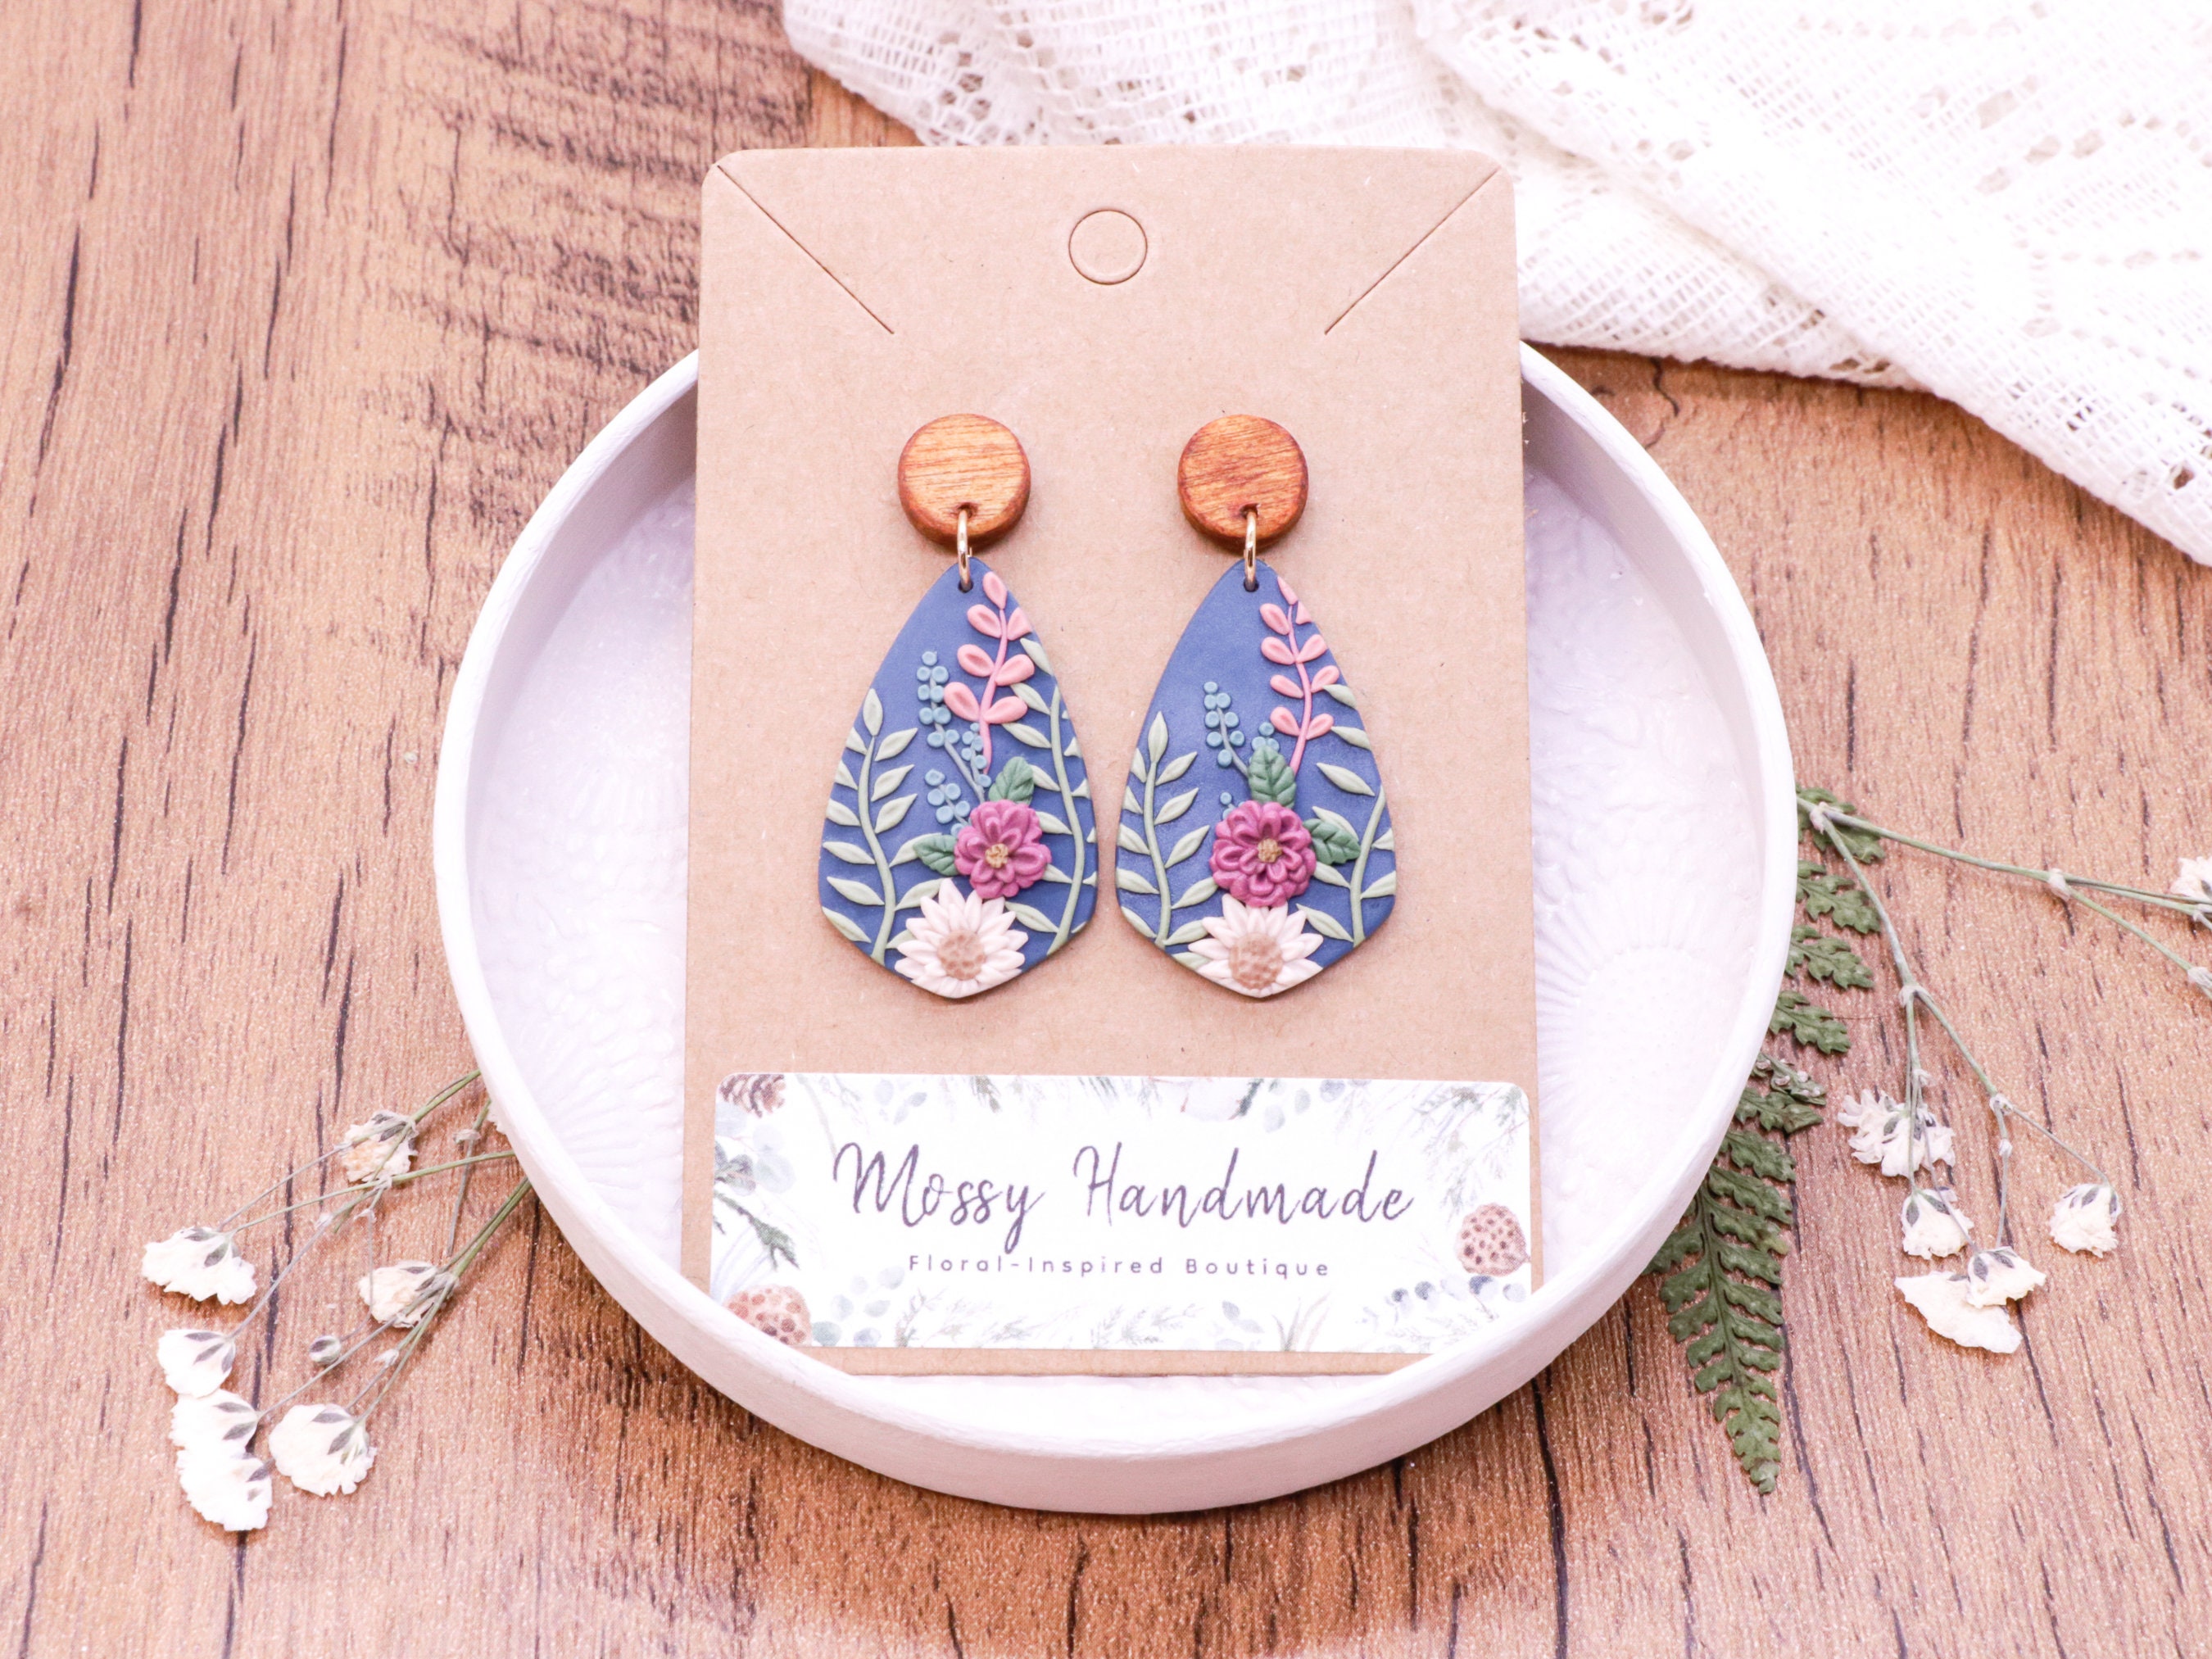 Rainy Day Earrings - Polymer Clay, brass and 14K gold fill ear